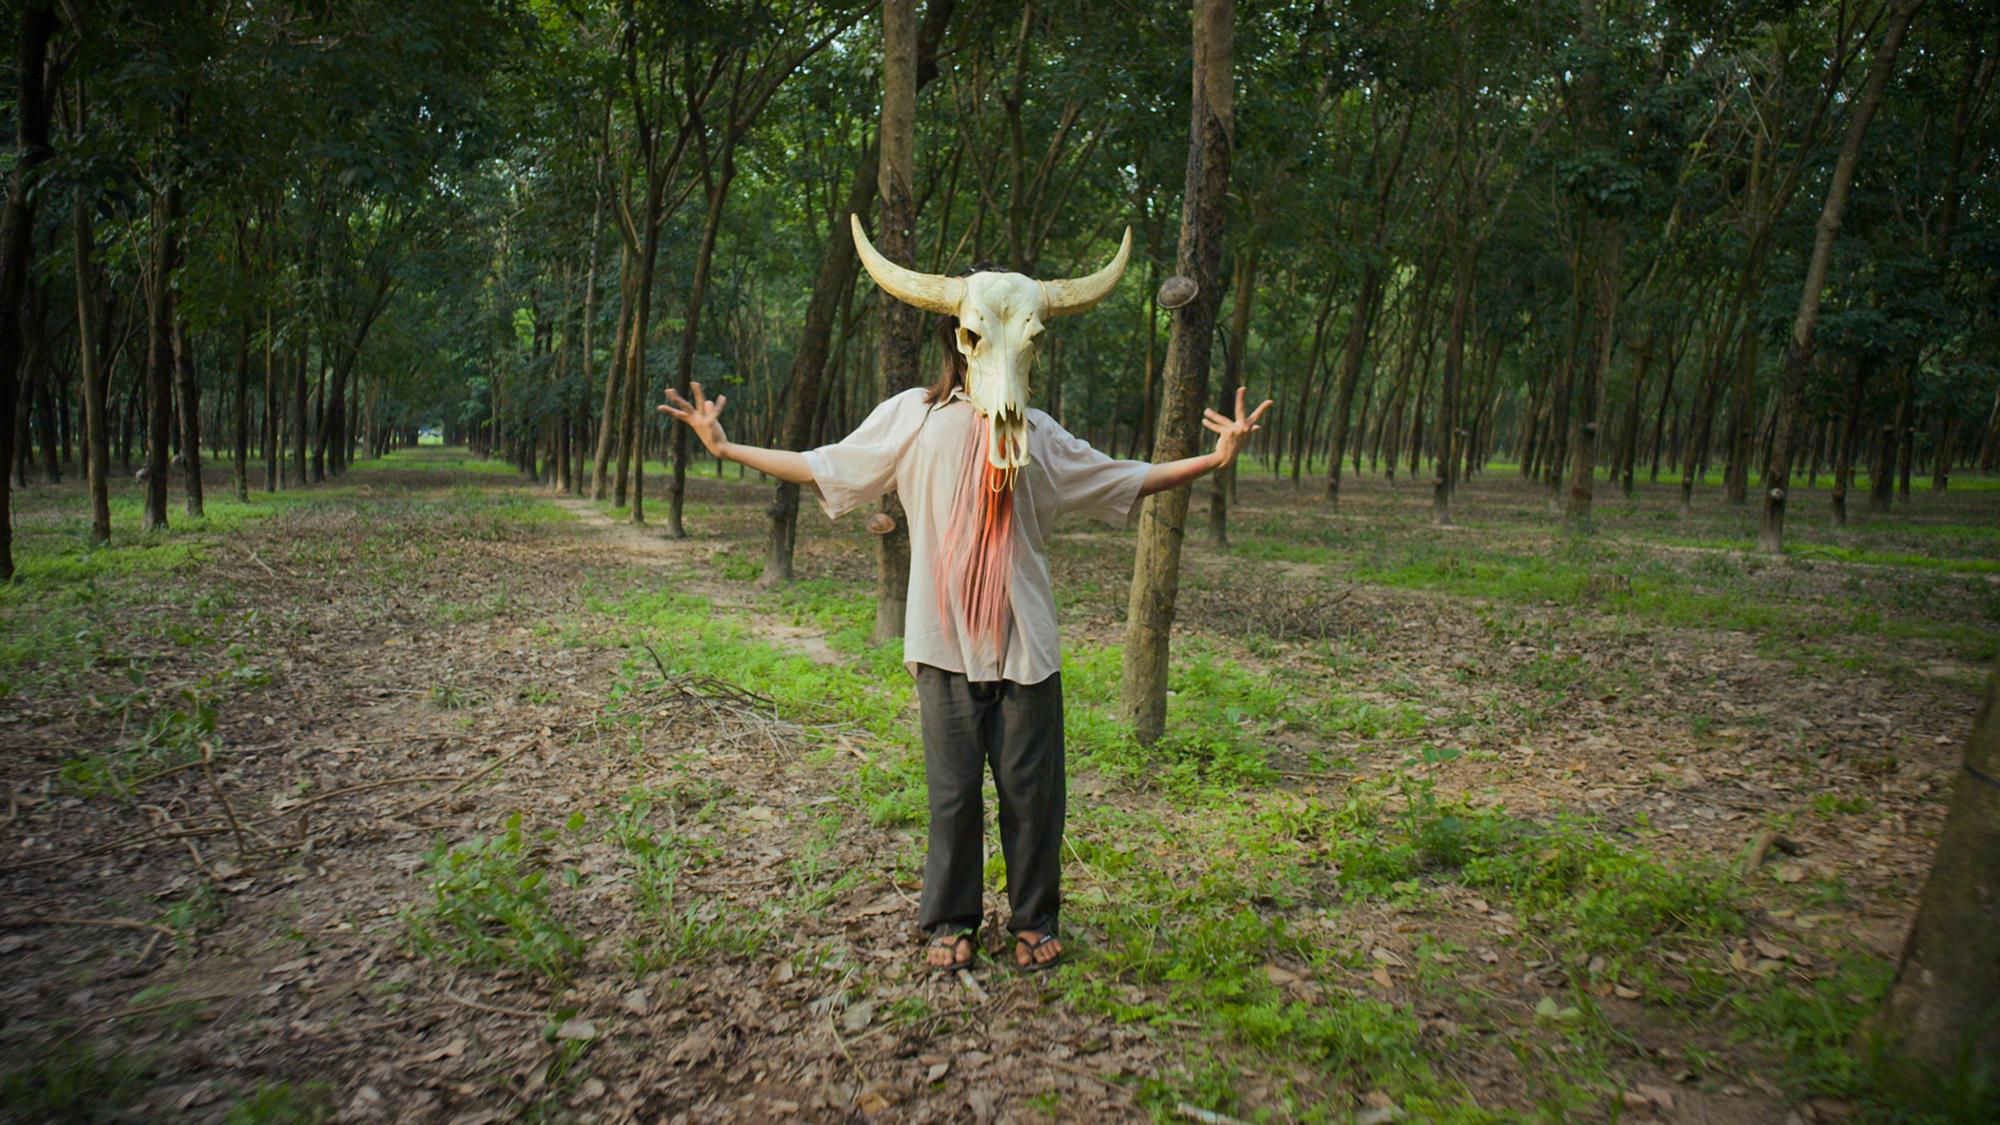 A person with a cow skull for a head stands in a forest, wearing a white shirt streaked with red and with arms outstretched.